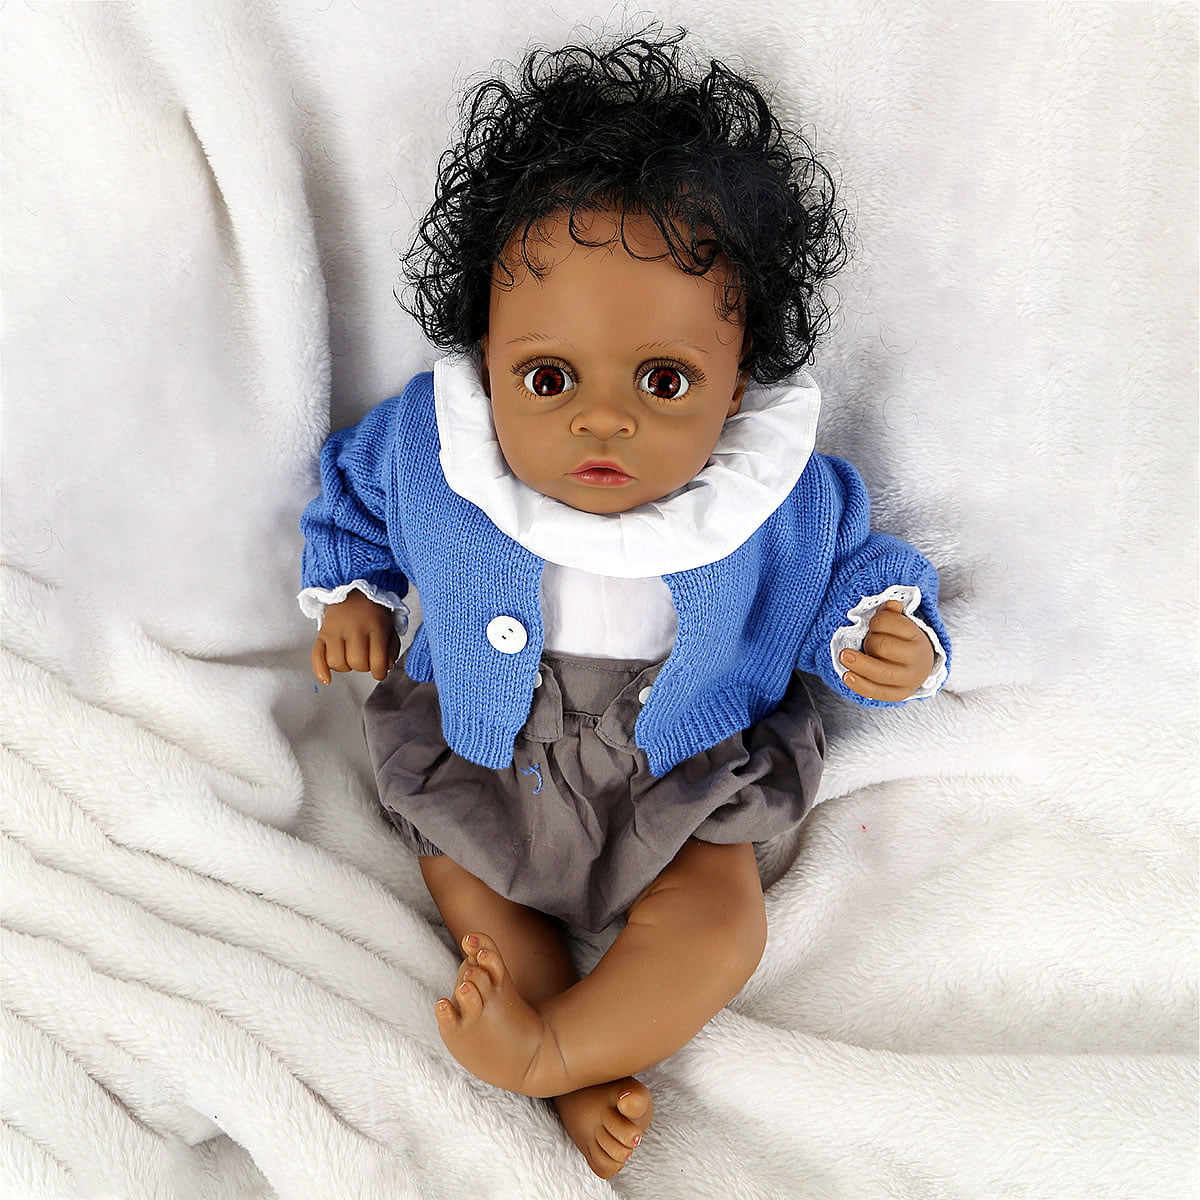 ILBaby Reborn Baby Dolls Black – So Adorable, You’ll Want One for Yourself!